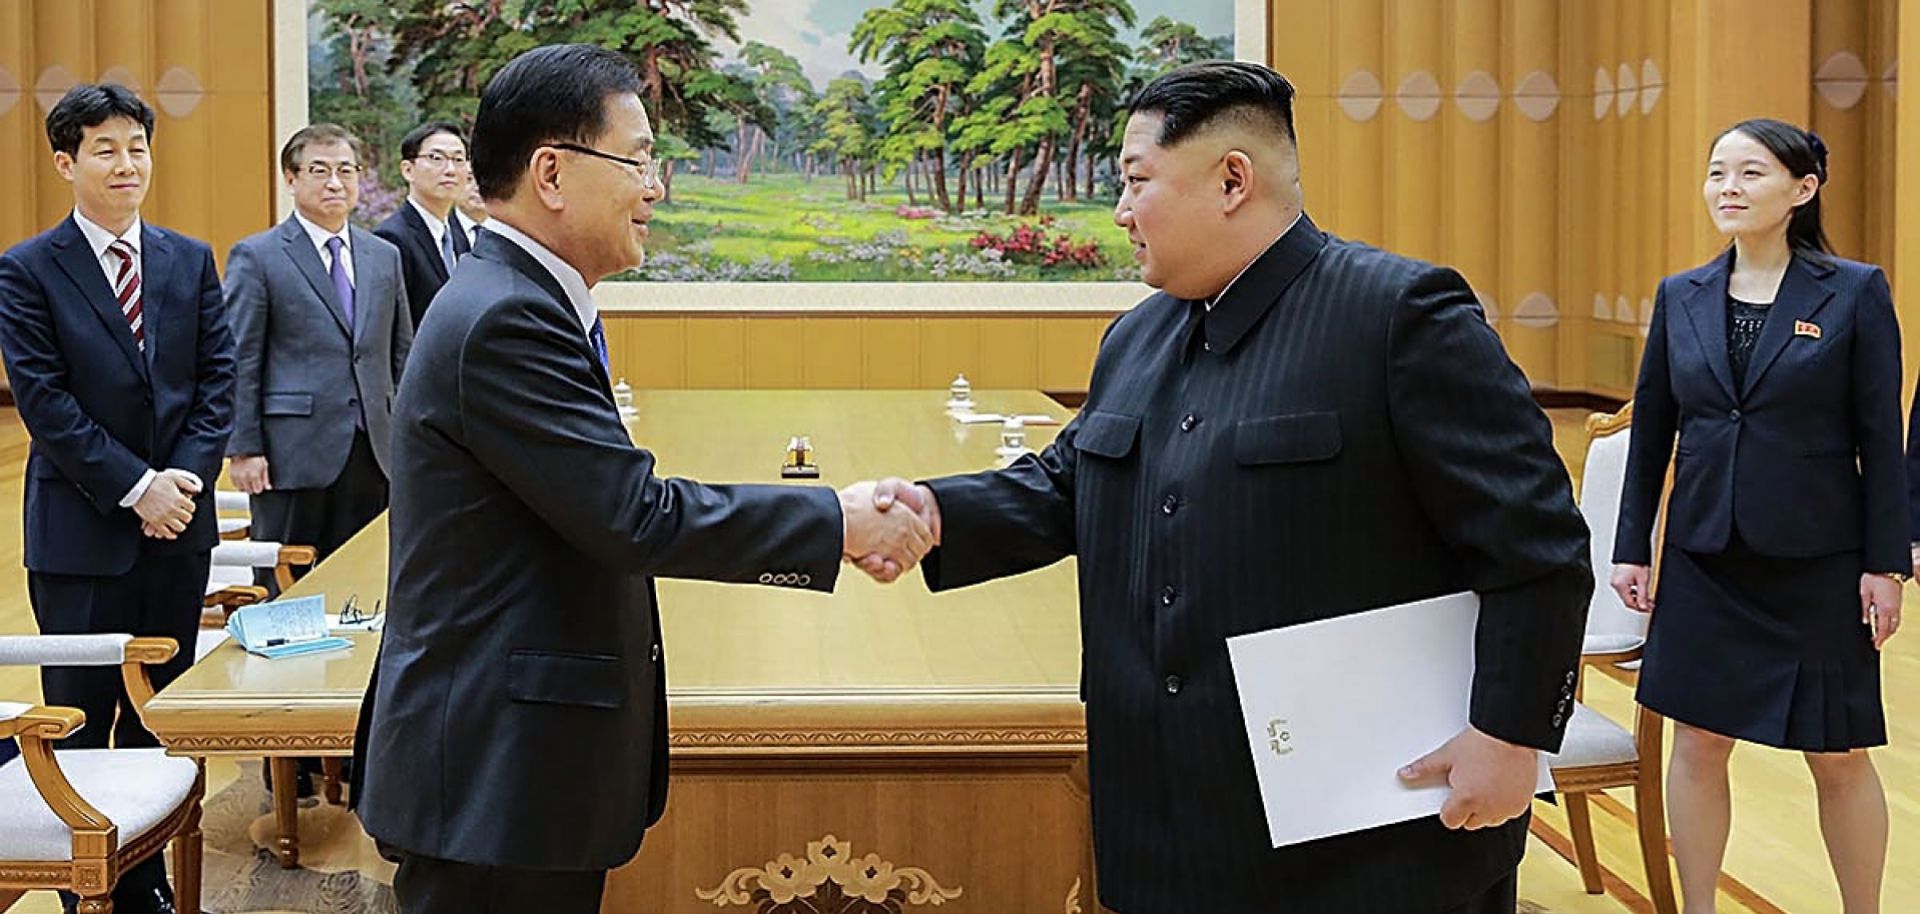 North Korean leader Kim Jong Un, right, shakes hands with South Korean National Security Director Chung Eui Yong in Pyongyang, North Korea, on March 5, 2018.